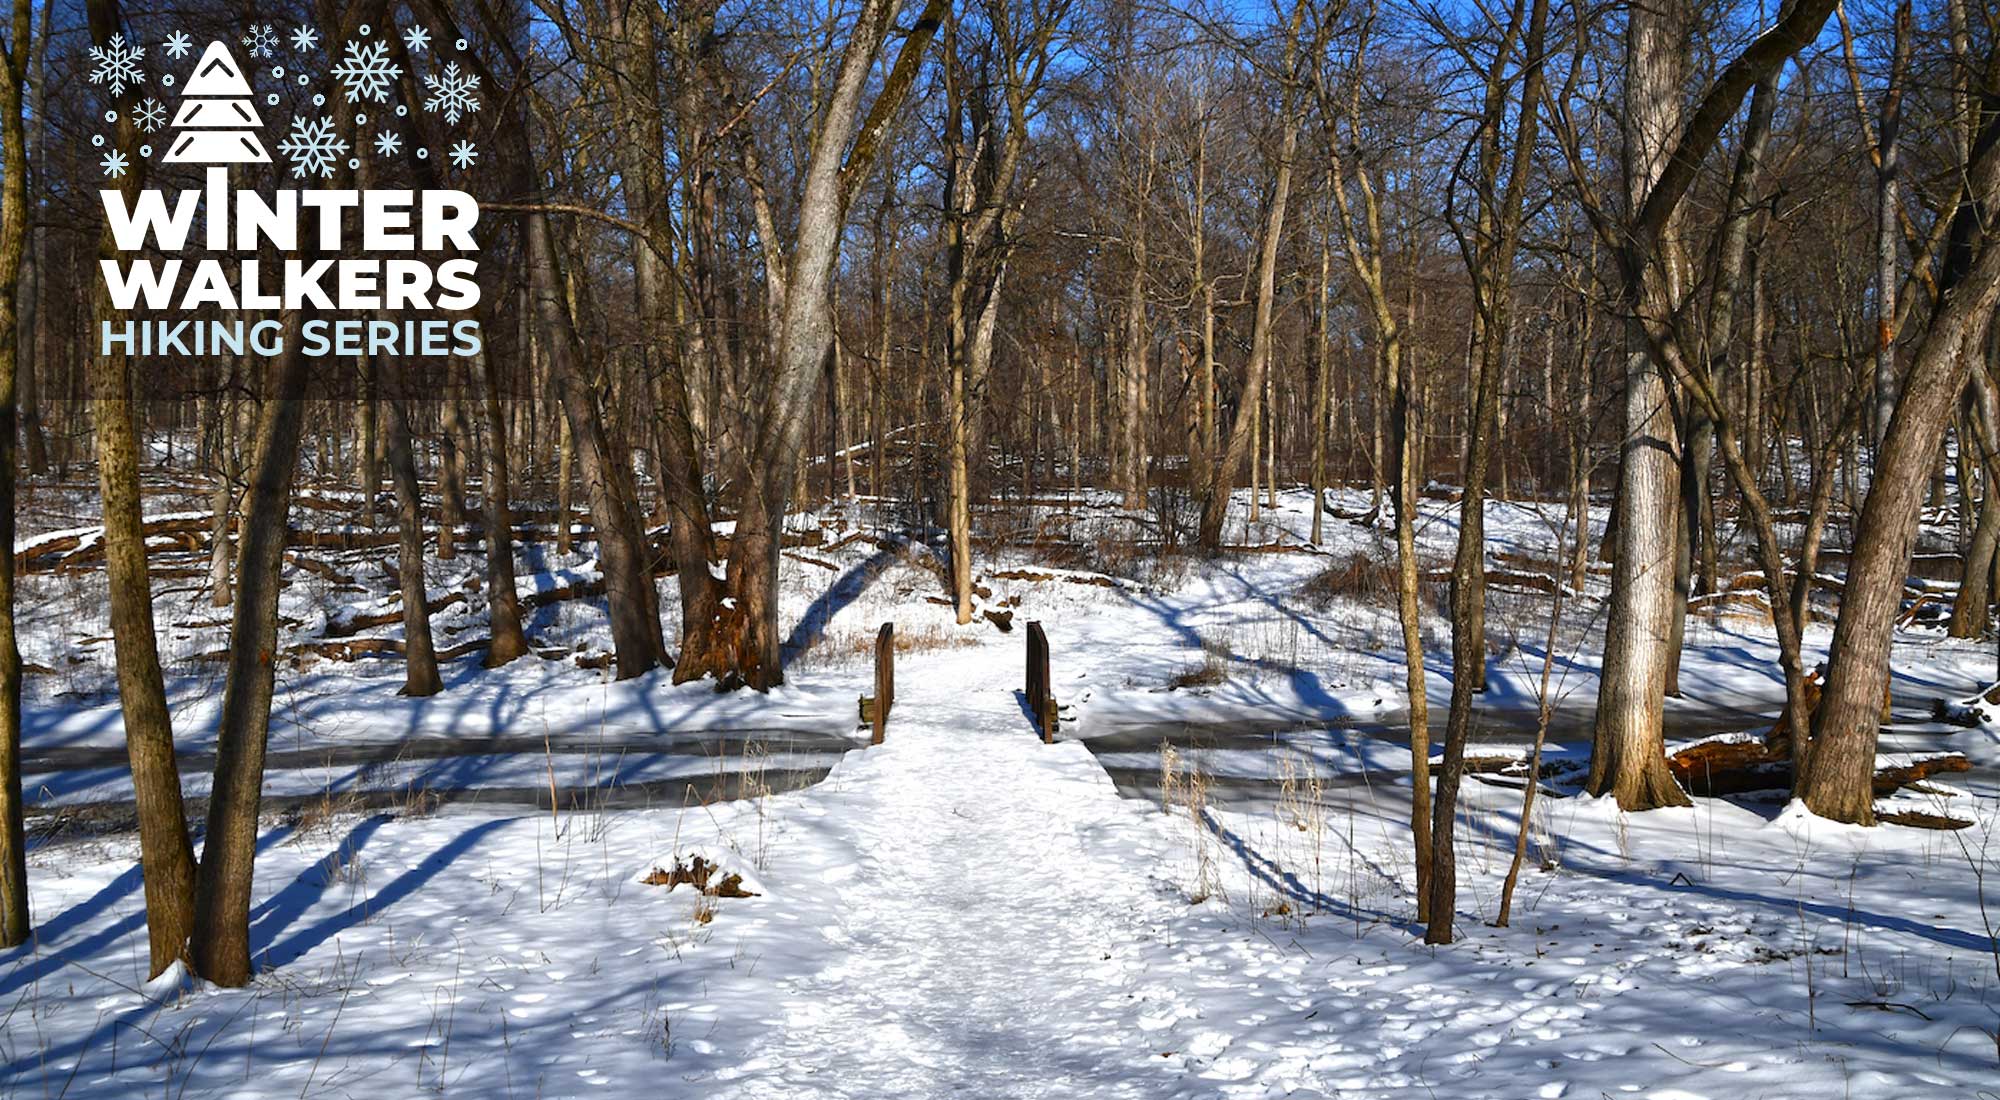 A snow-covered trail in the woods.